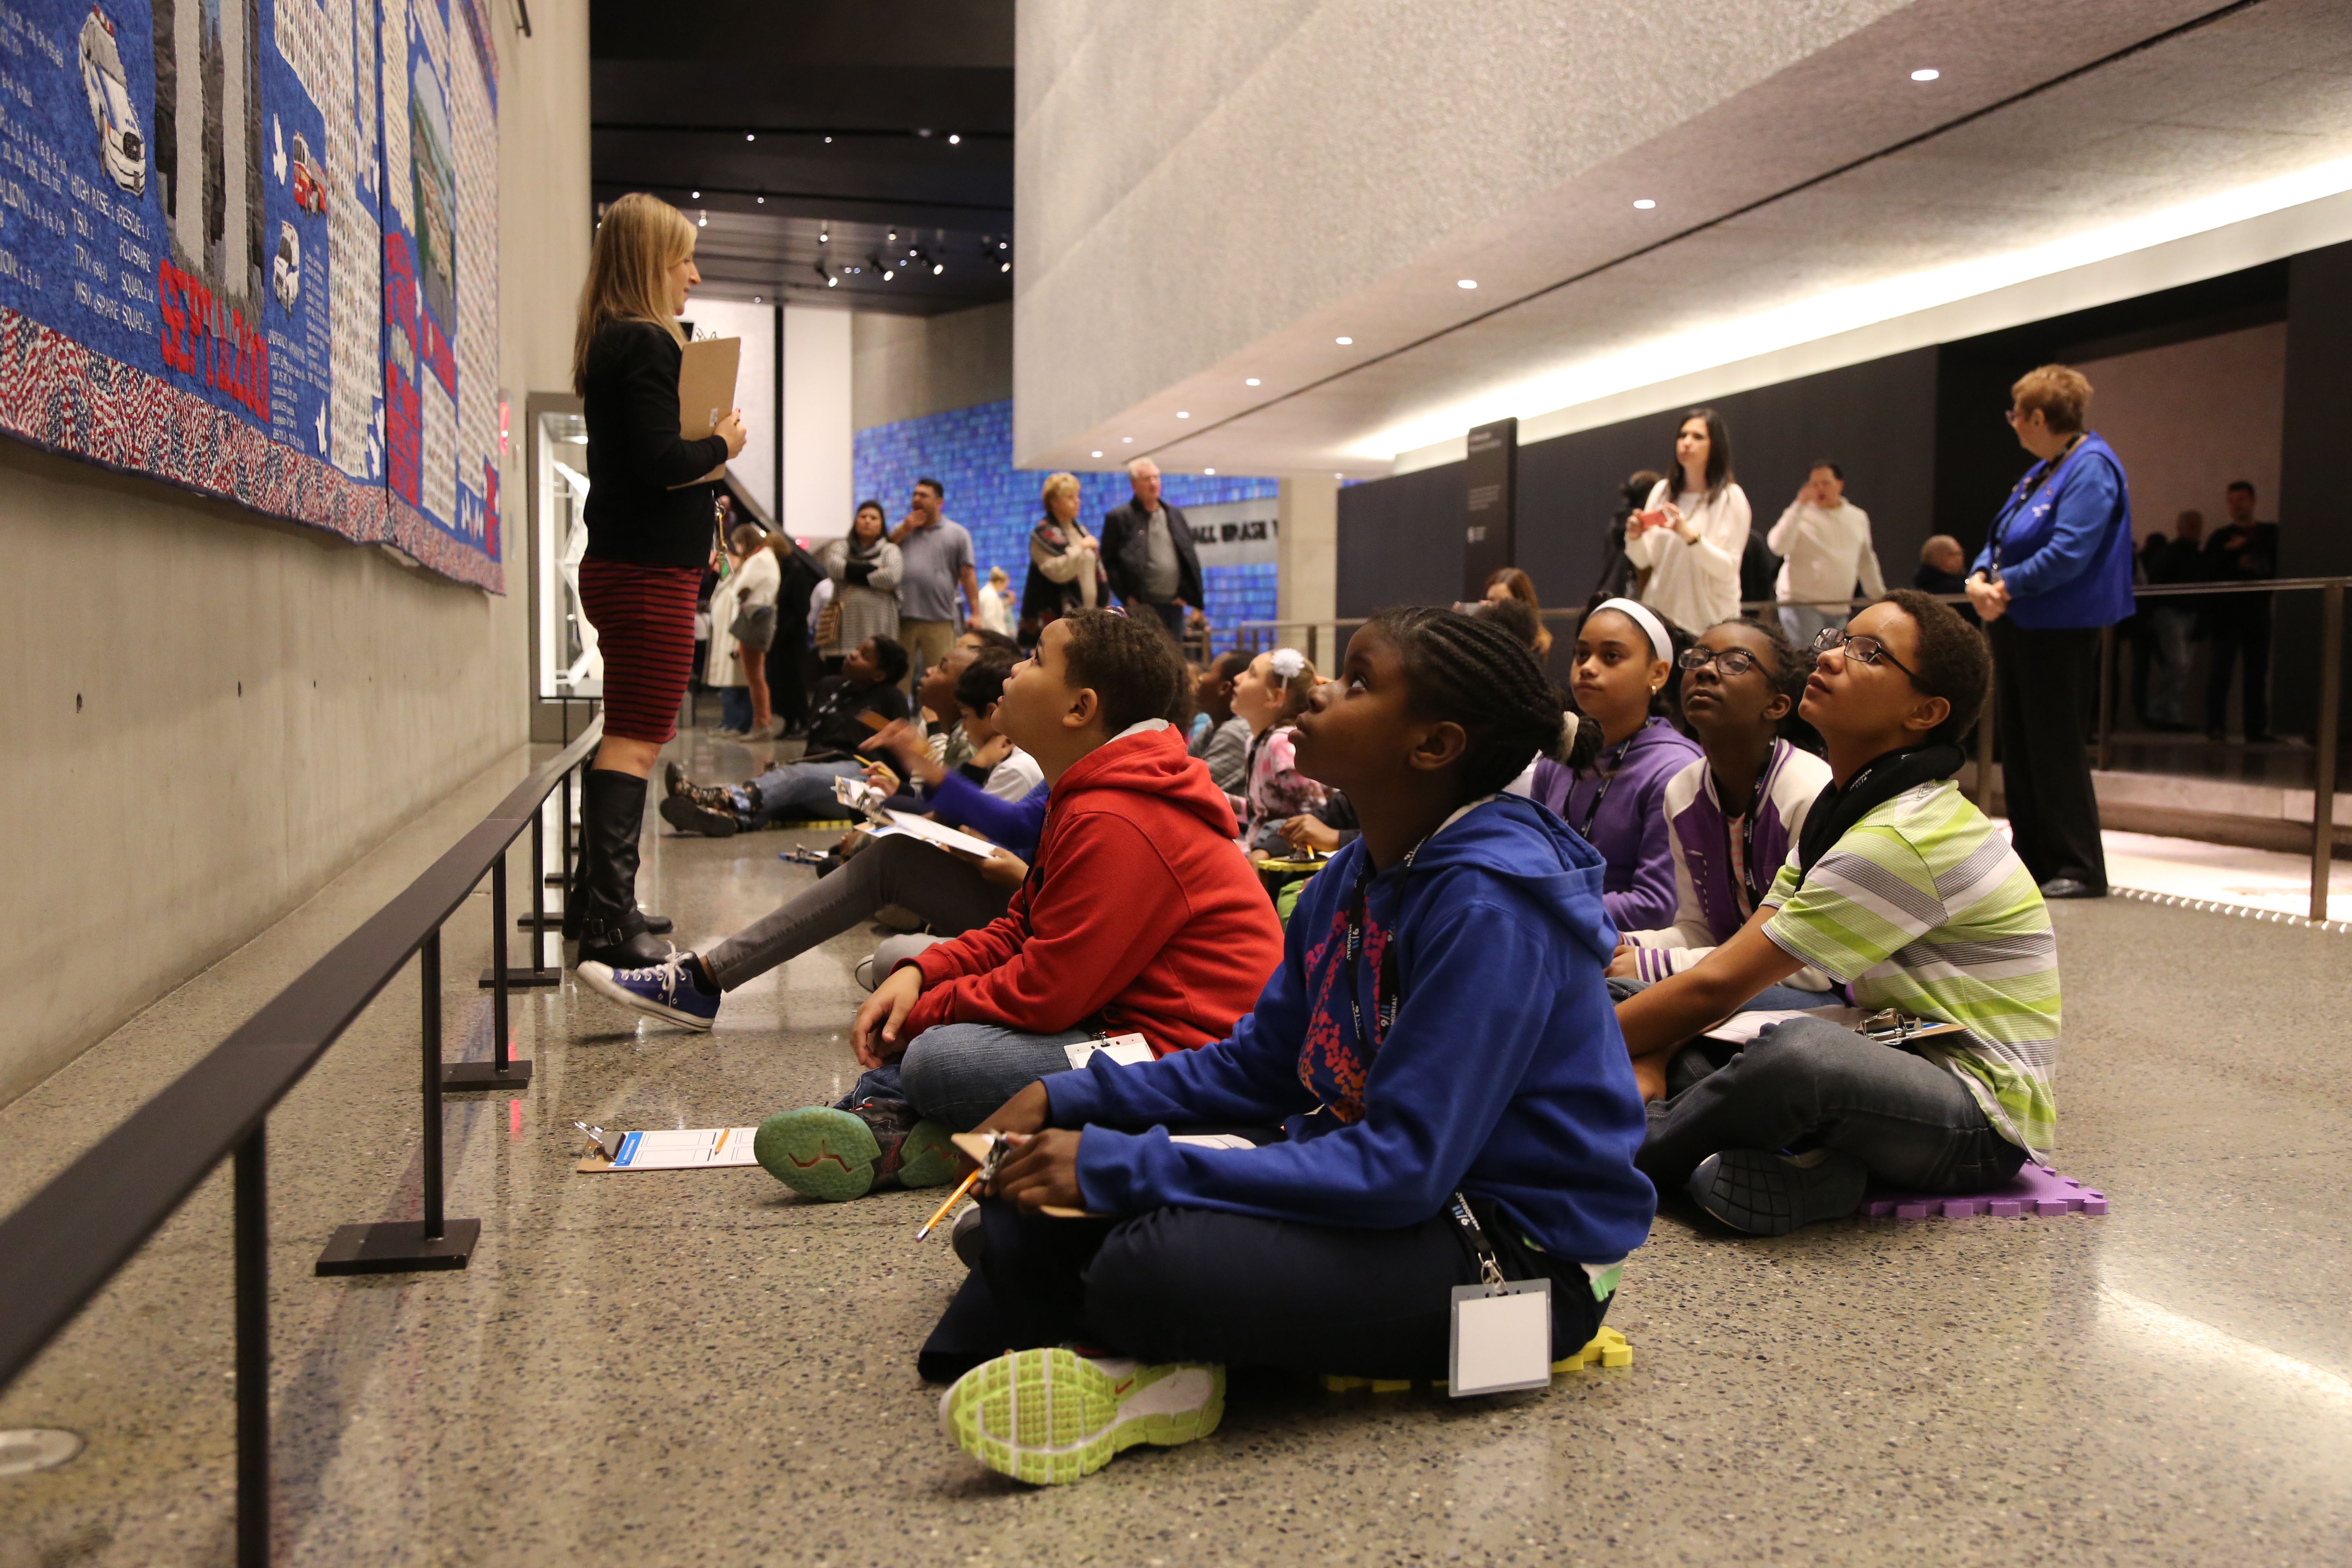 Students sit on the floor of the Museum as they listen to a woman standing in front of the Victims’ Memorial Quilt speak.